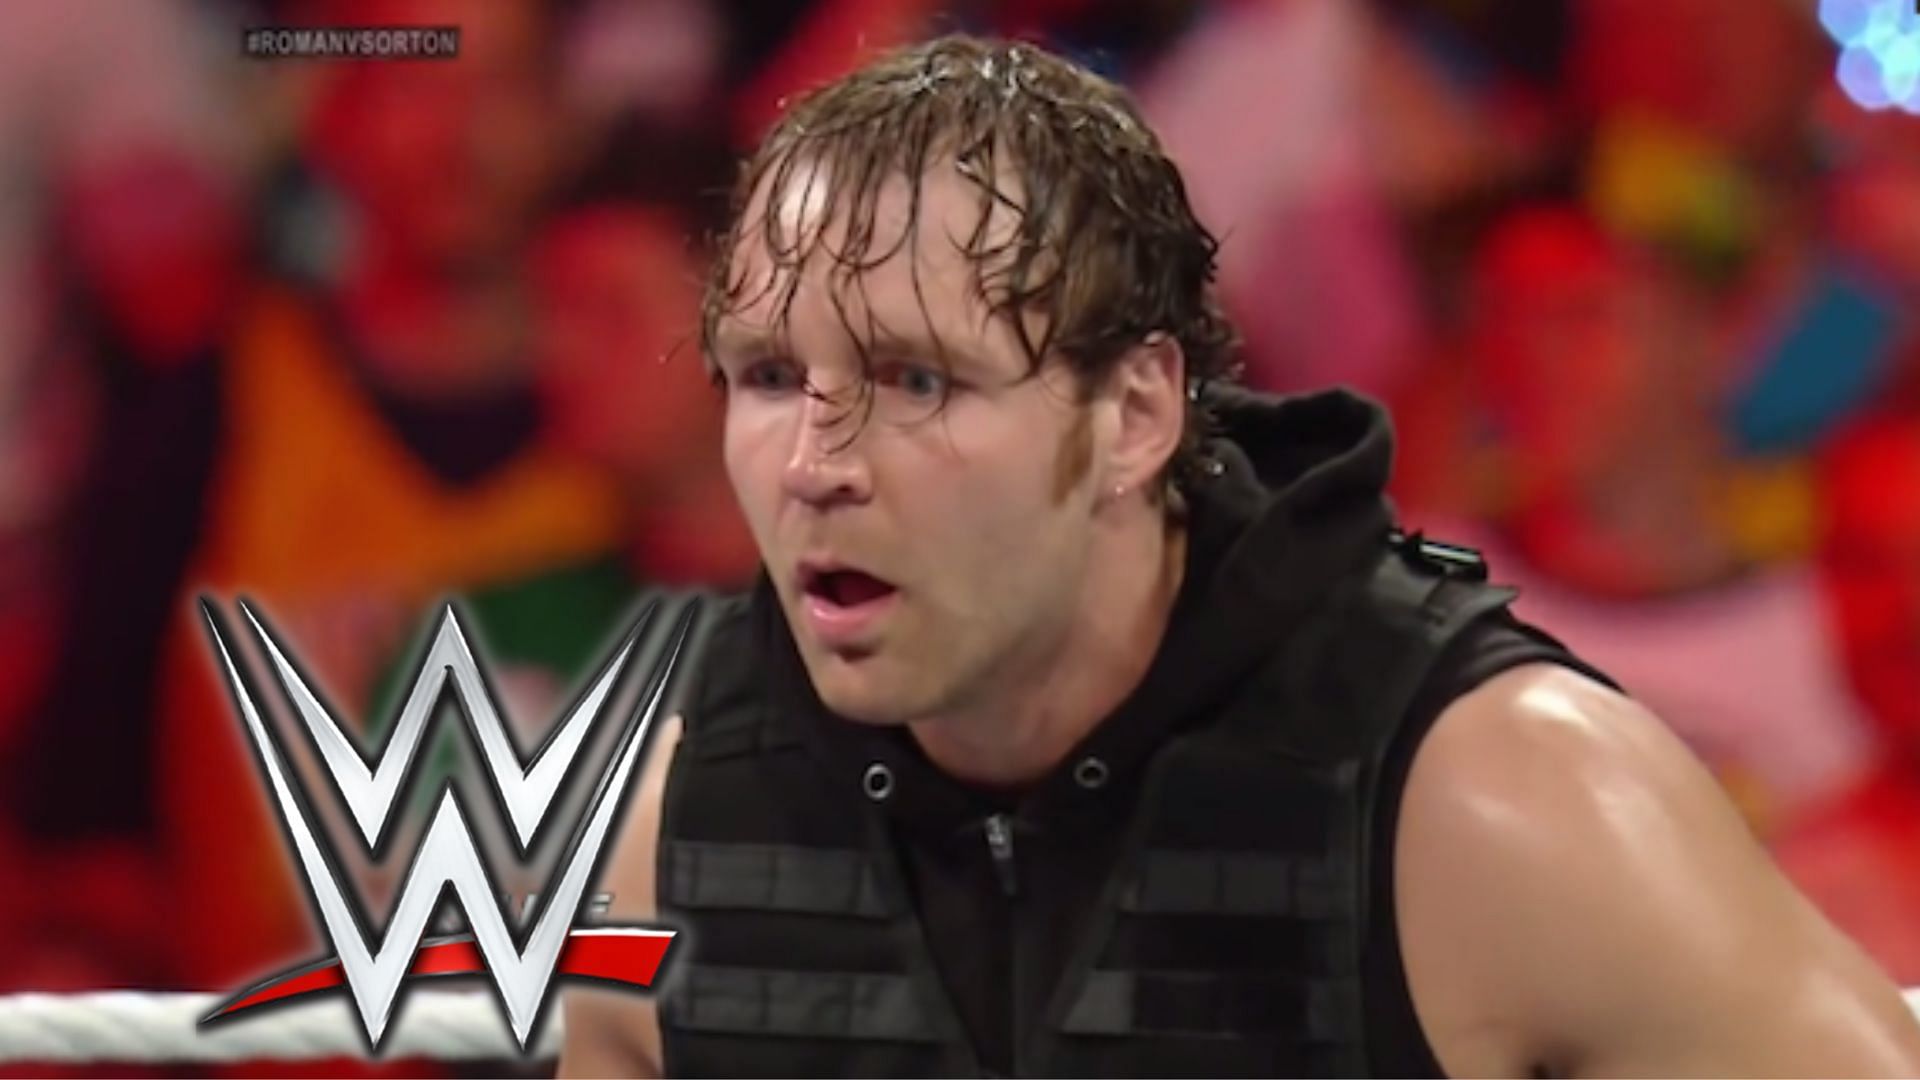 Jon Moxley asked for his release from WWE in 2019